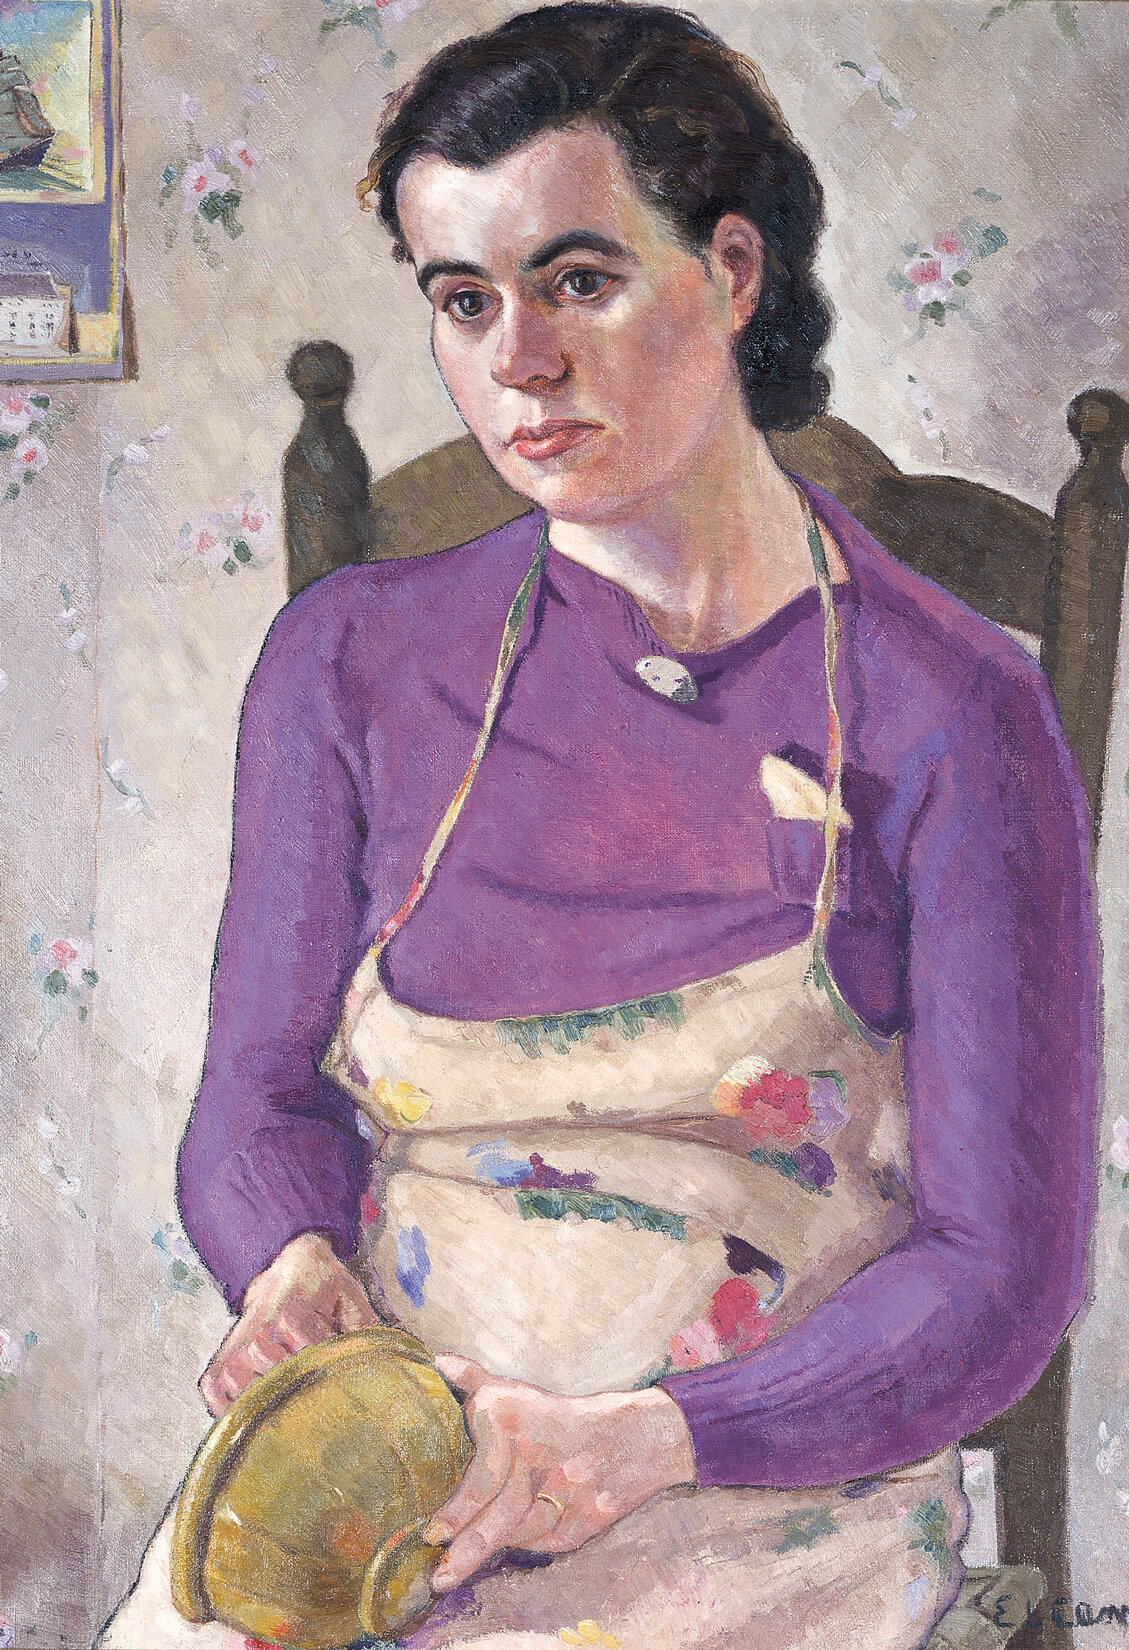 The Soldier’s Wife, 1941